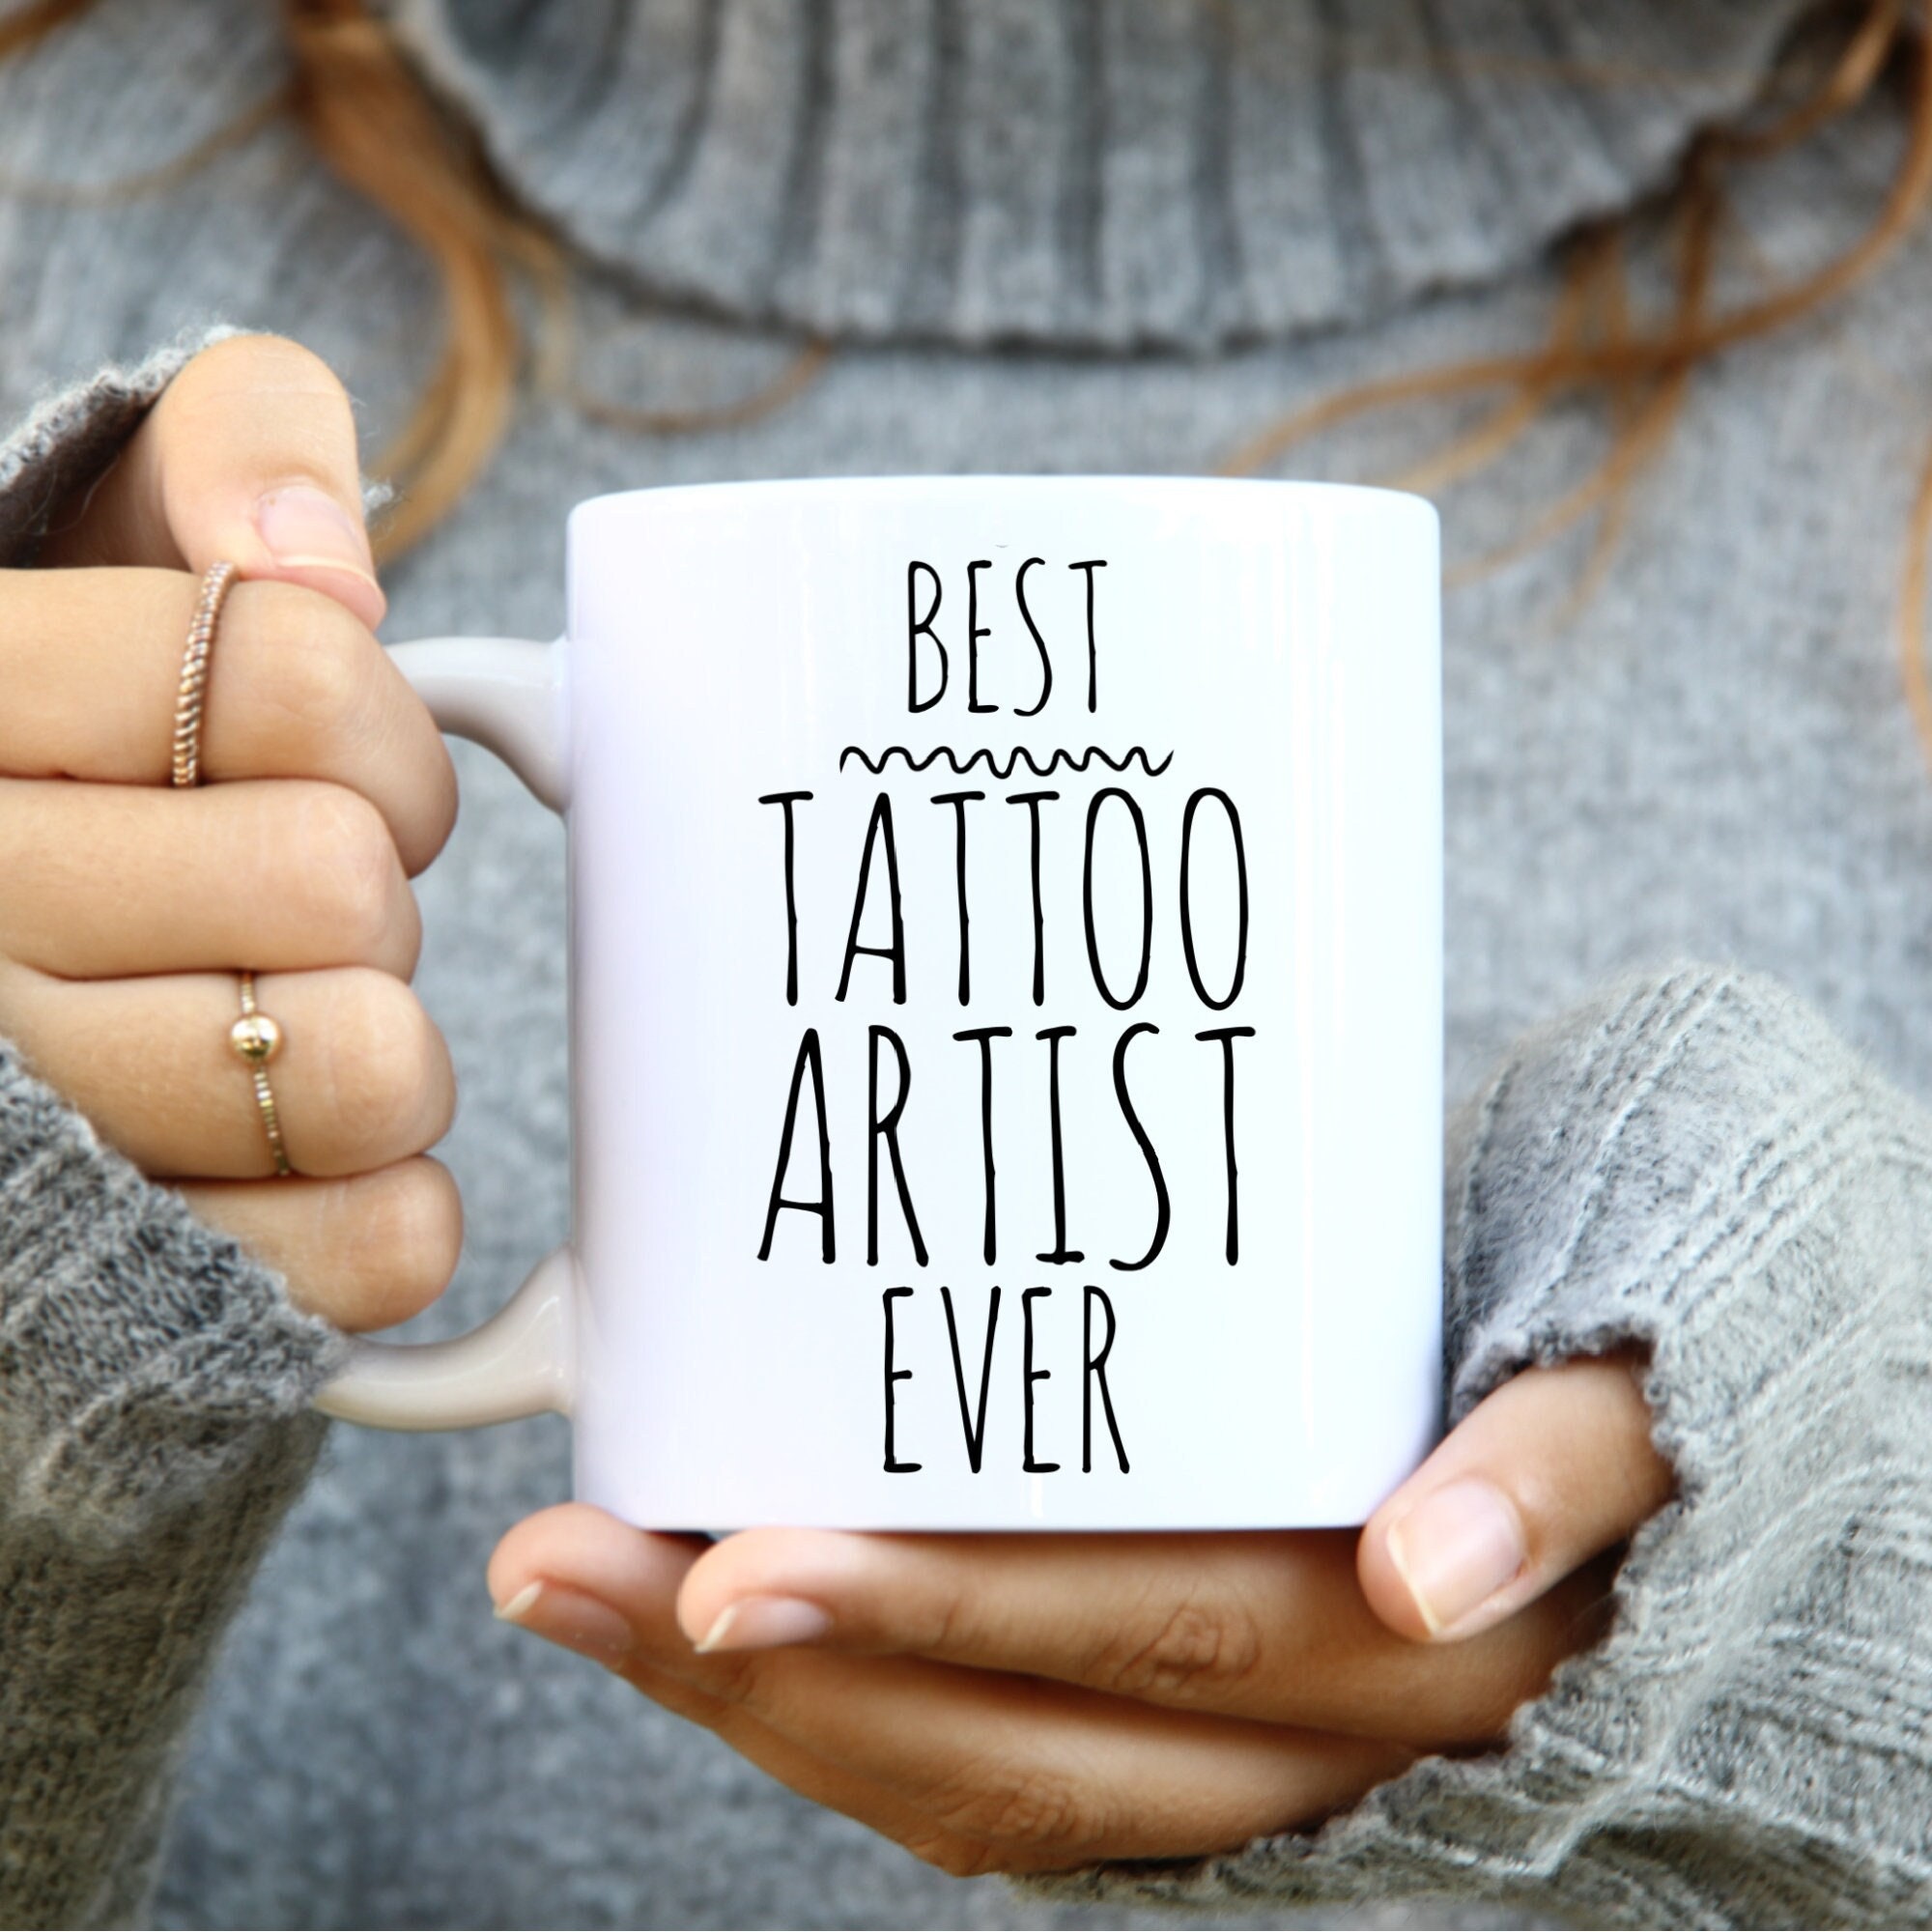 23 Best Tattoo Artist Gifts They Would Thank You For  Gifts for an artist Tattoo  artists Artist gifts